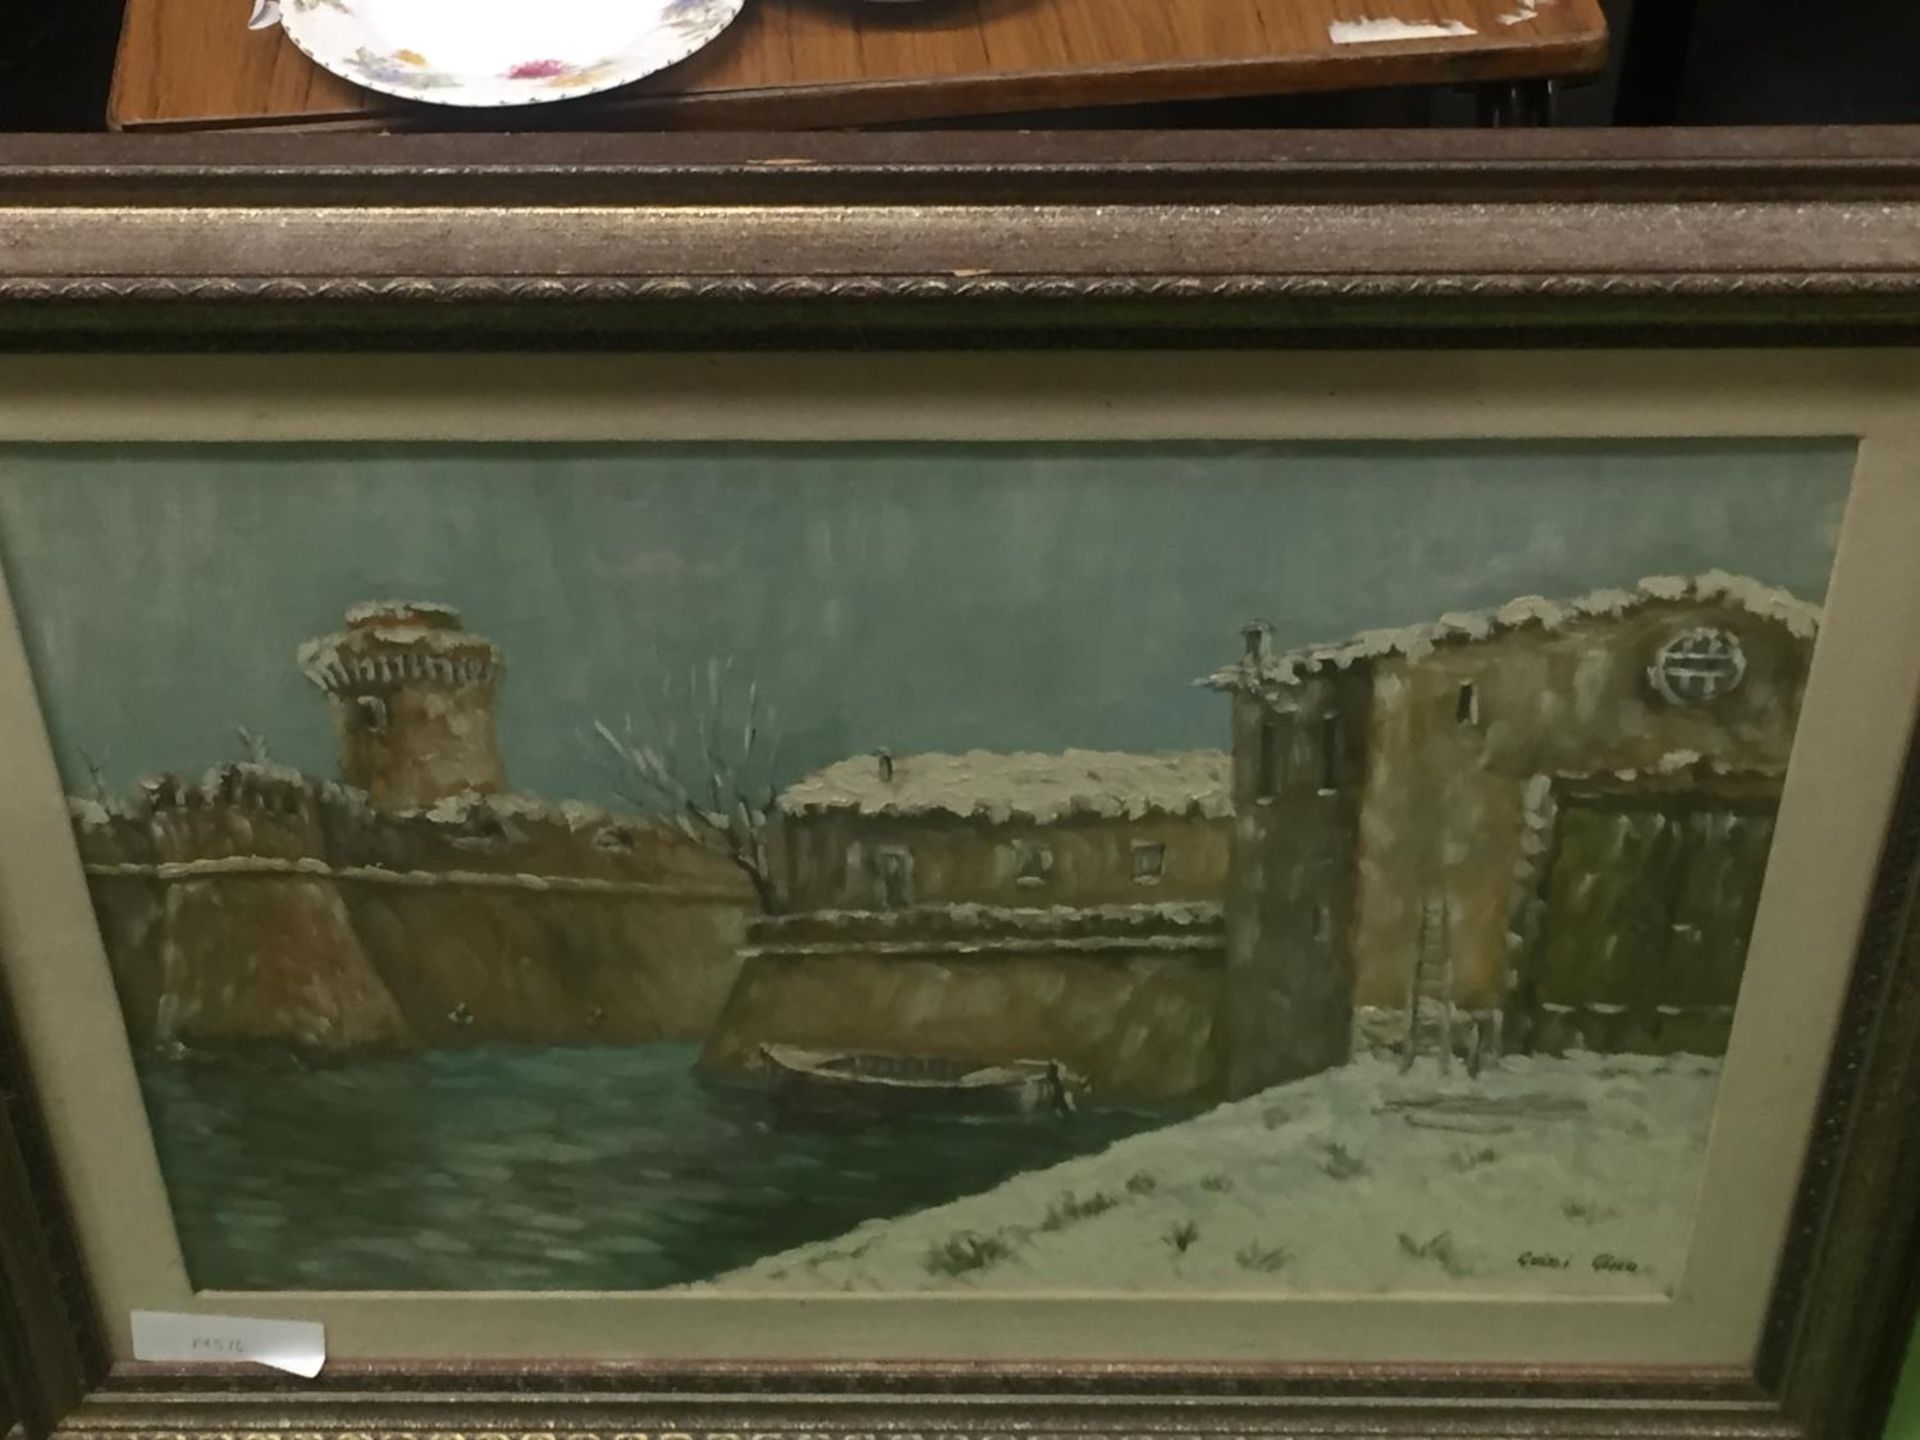 A LARGE SIGNED GUIDI GINO OIL ON CANVAS PAINTING OF CASTLE WALLS AND A MOAT, FRAMED, 91CM X 72CM